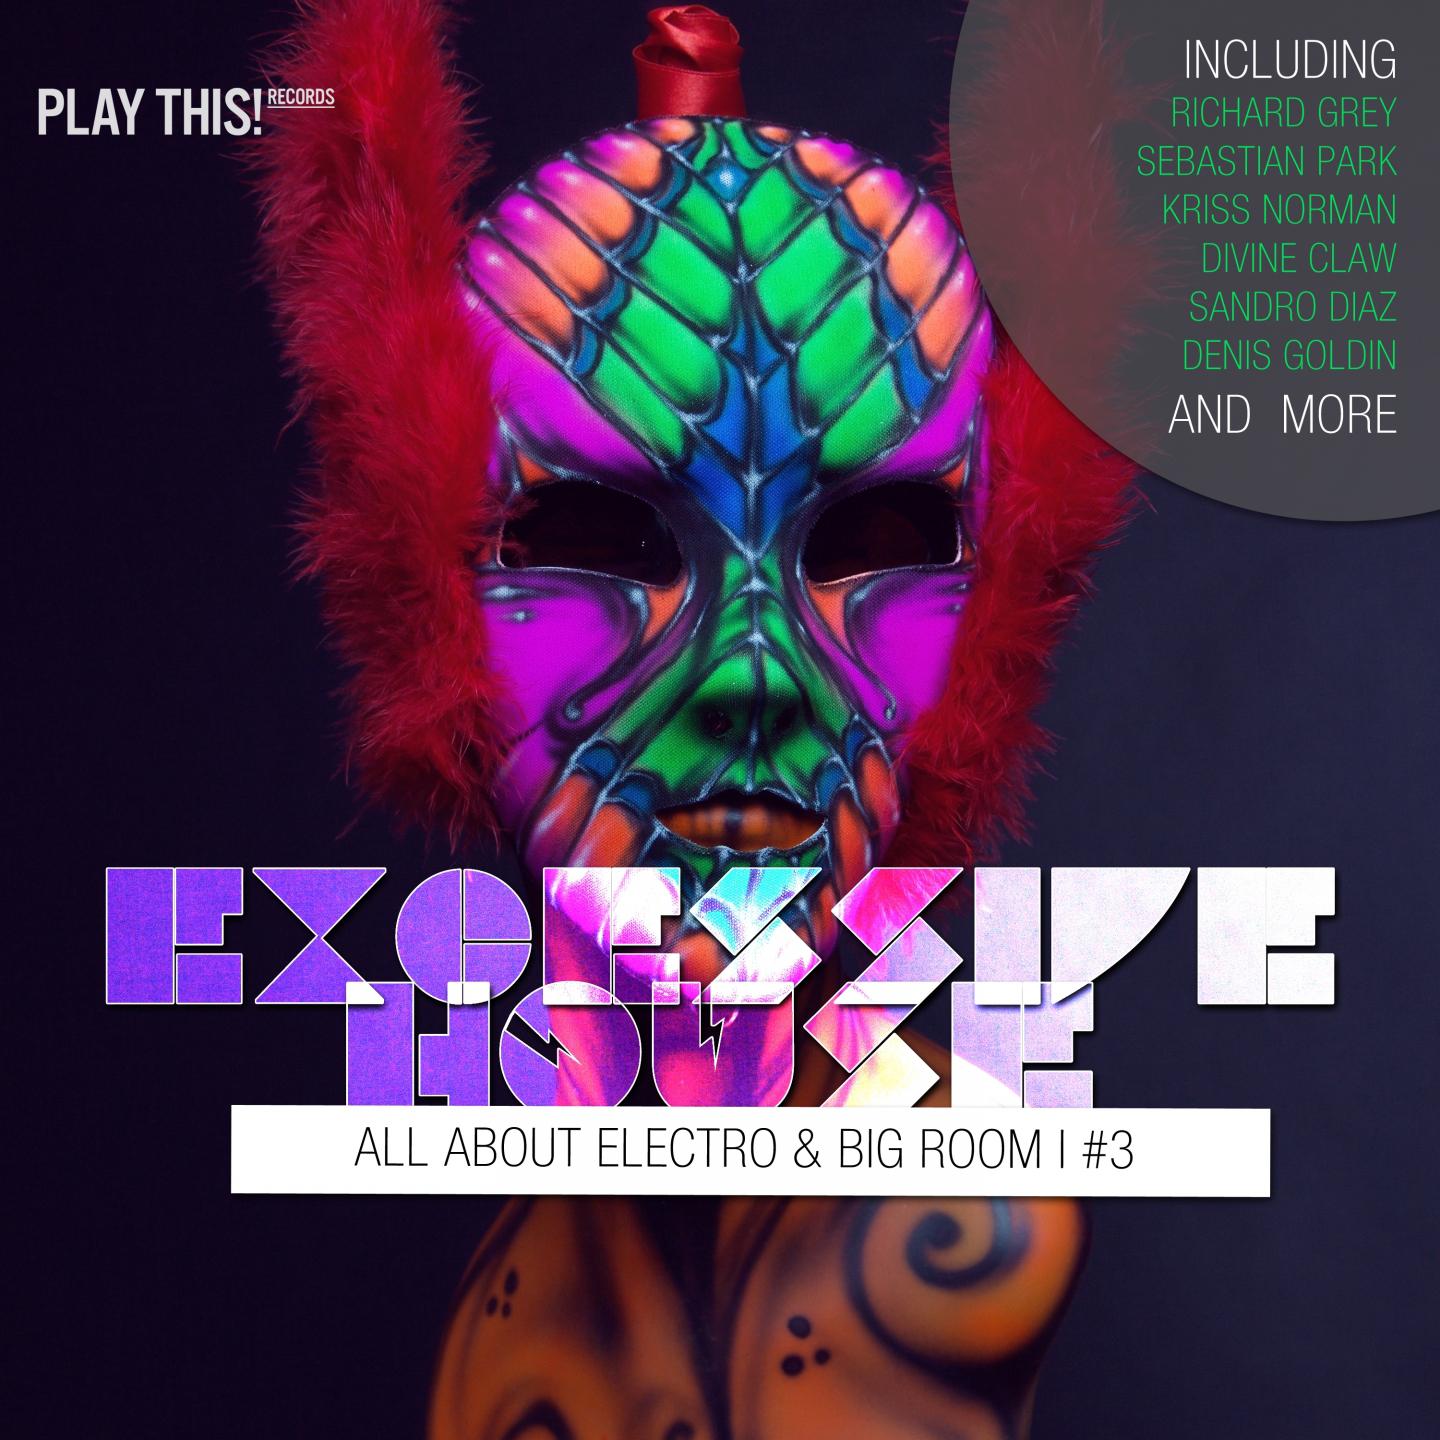 Excessive House, Vol. 3 - All About Electro & Big Room